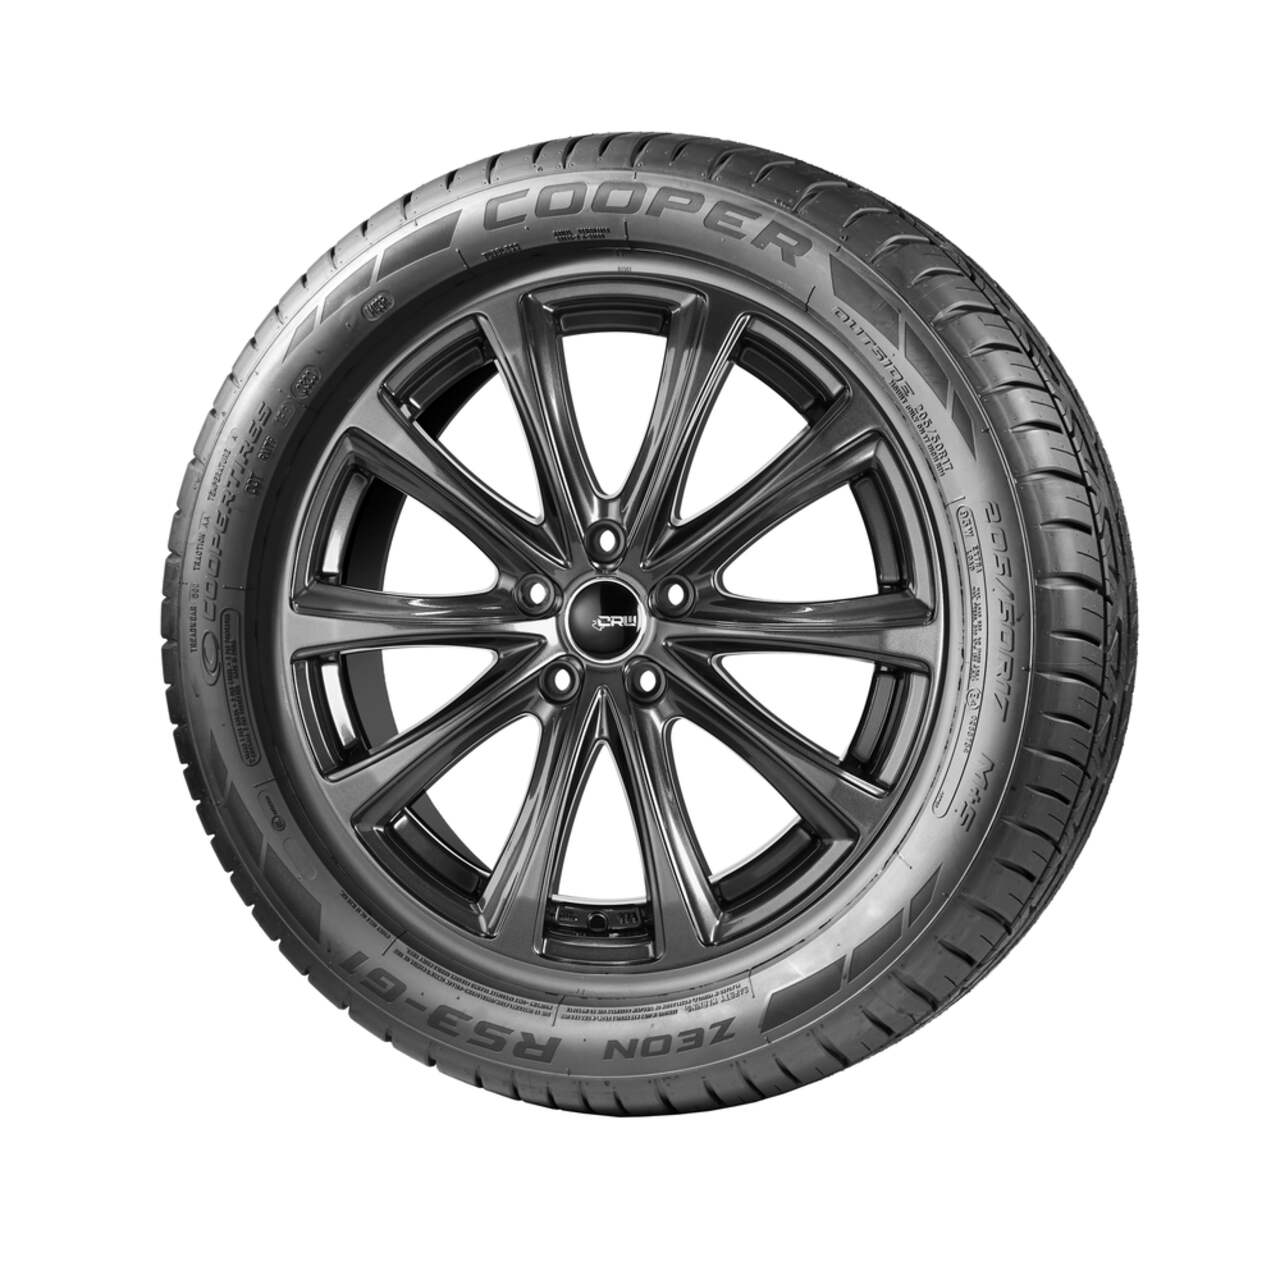 Cooper Zeon RS3-G1 Performance Tire For Passenger & CUV